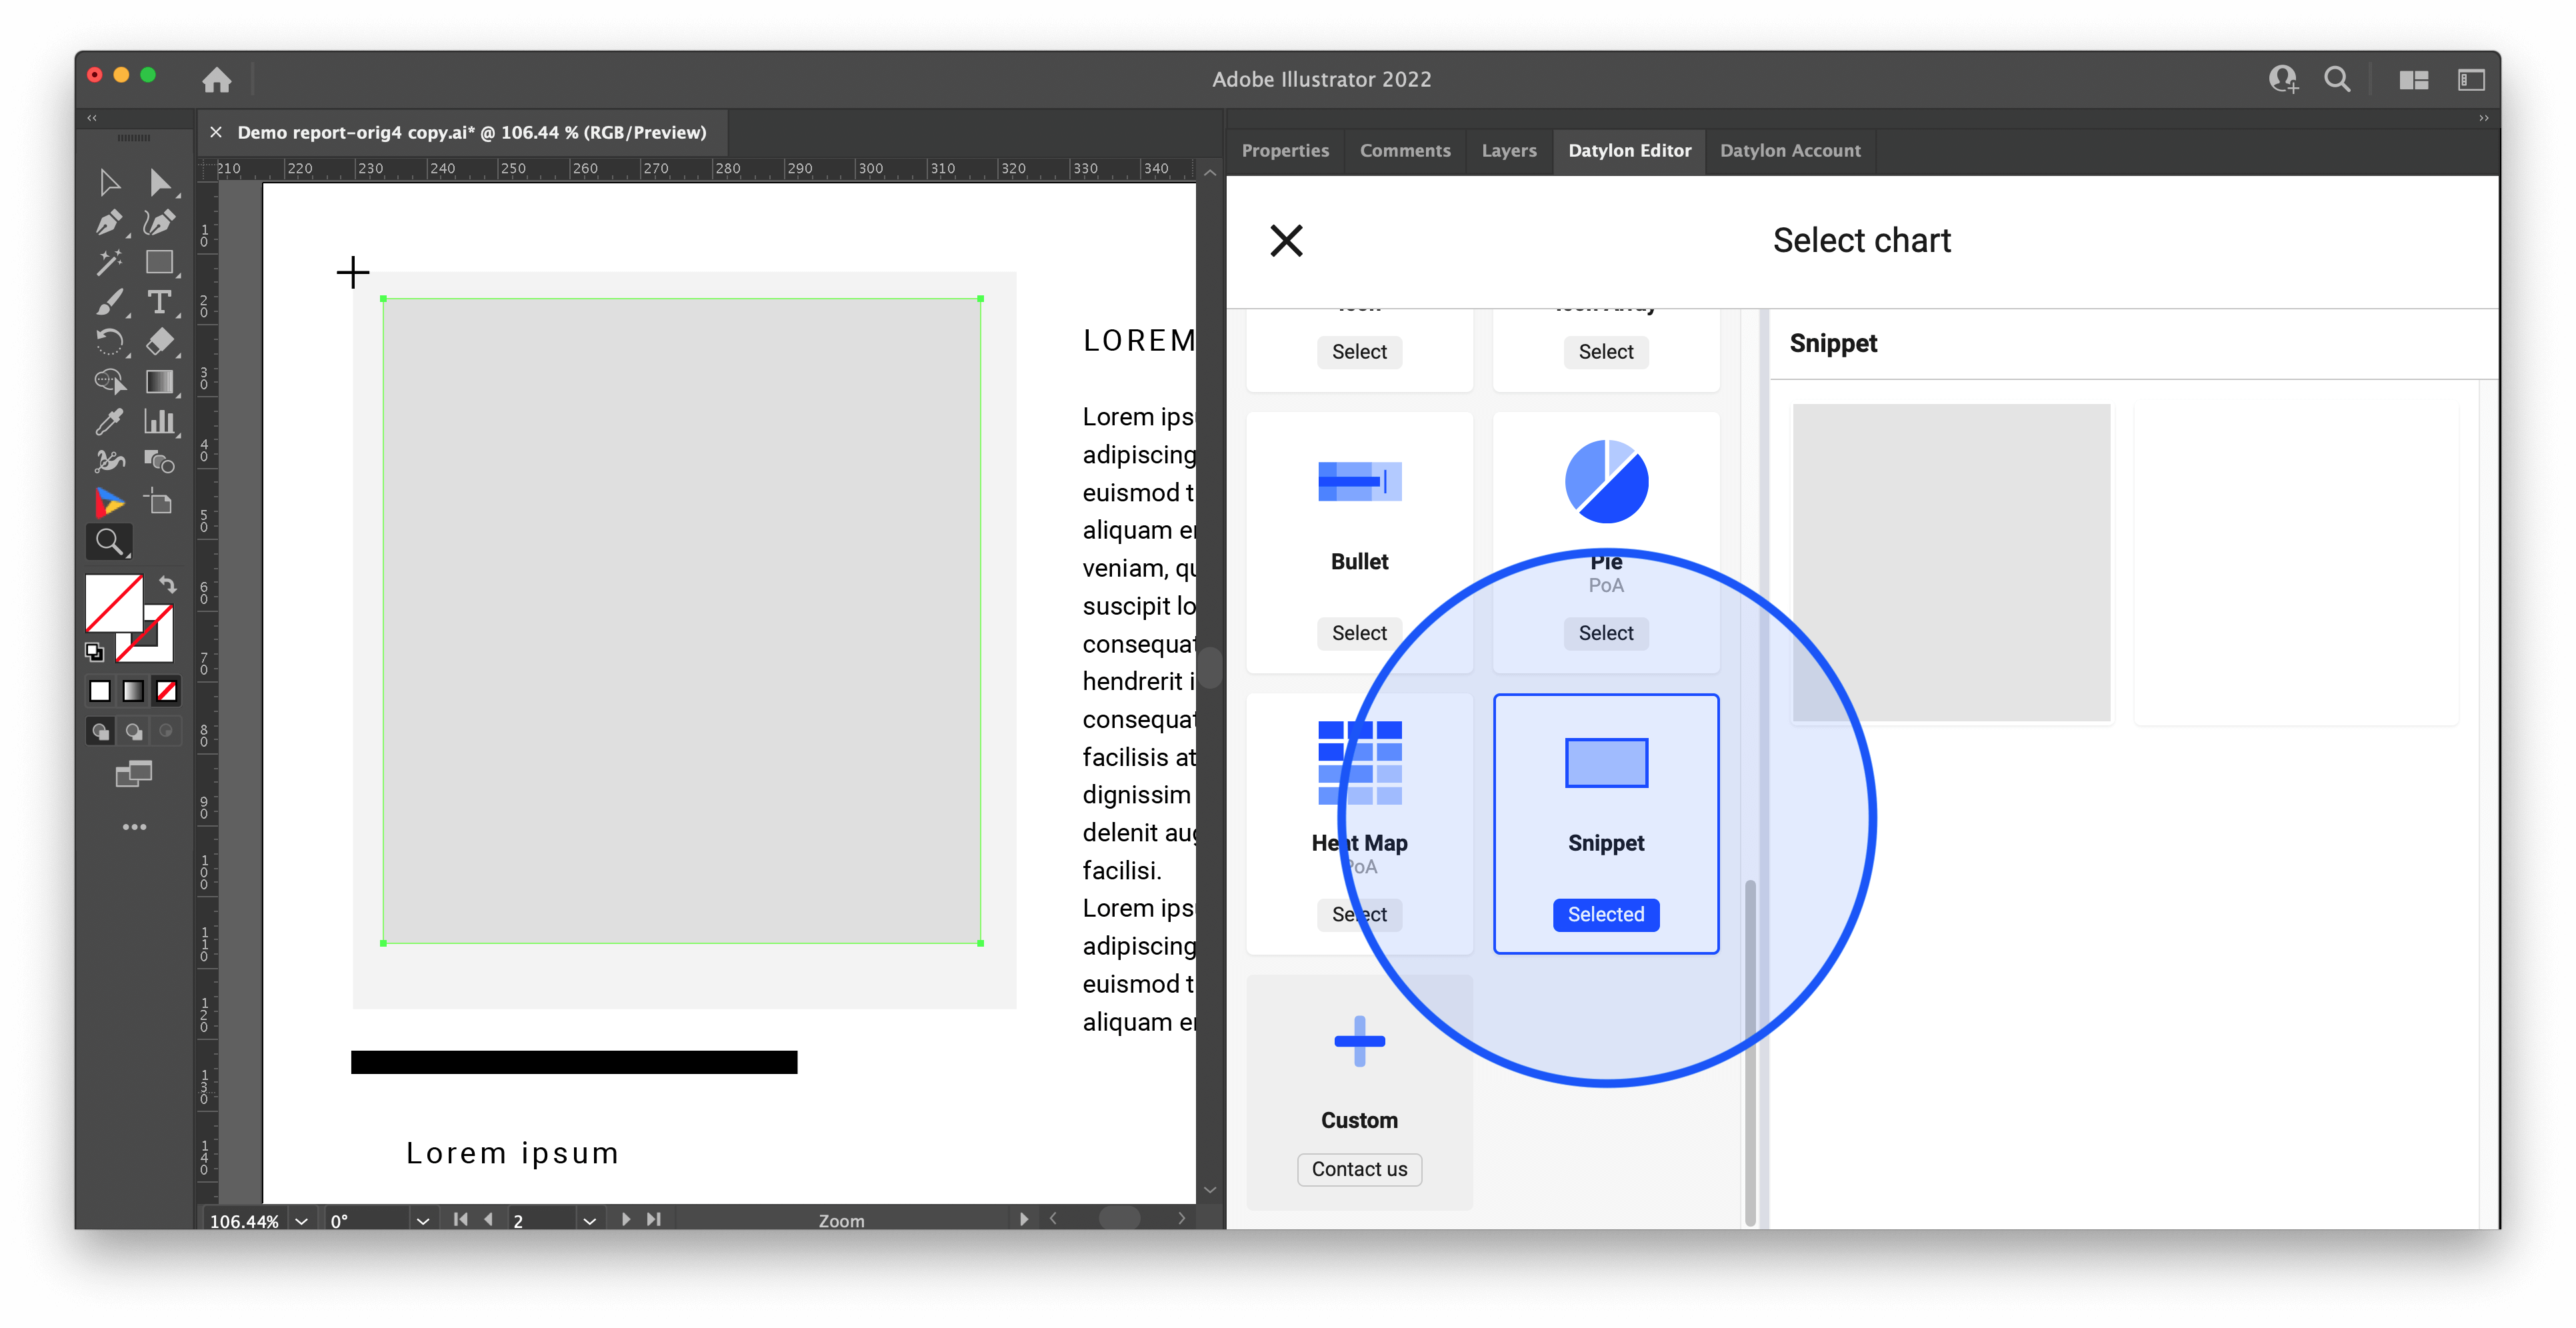 an image of a new chart type - snippet